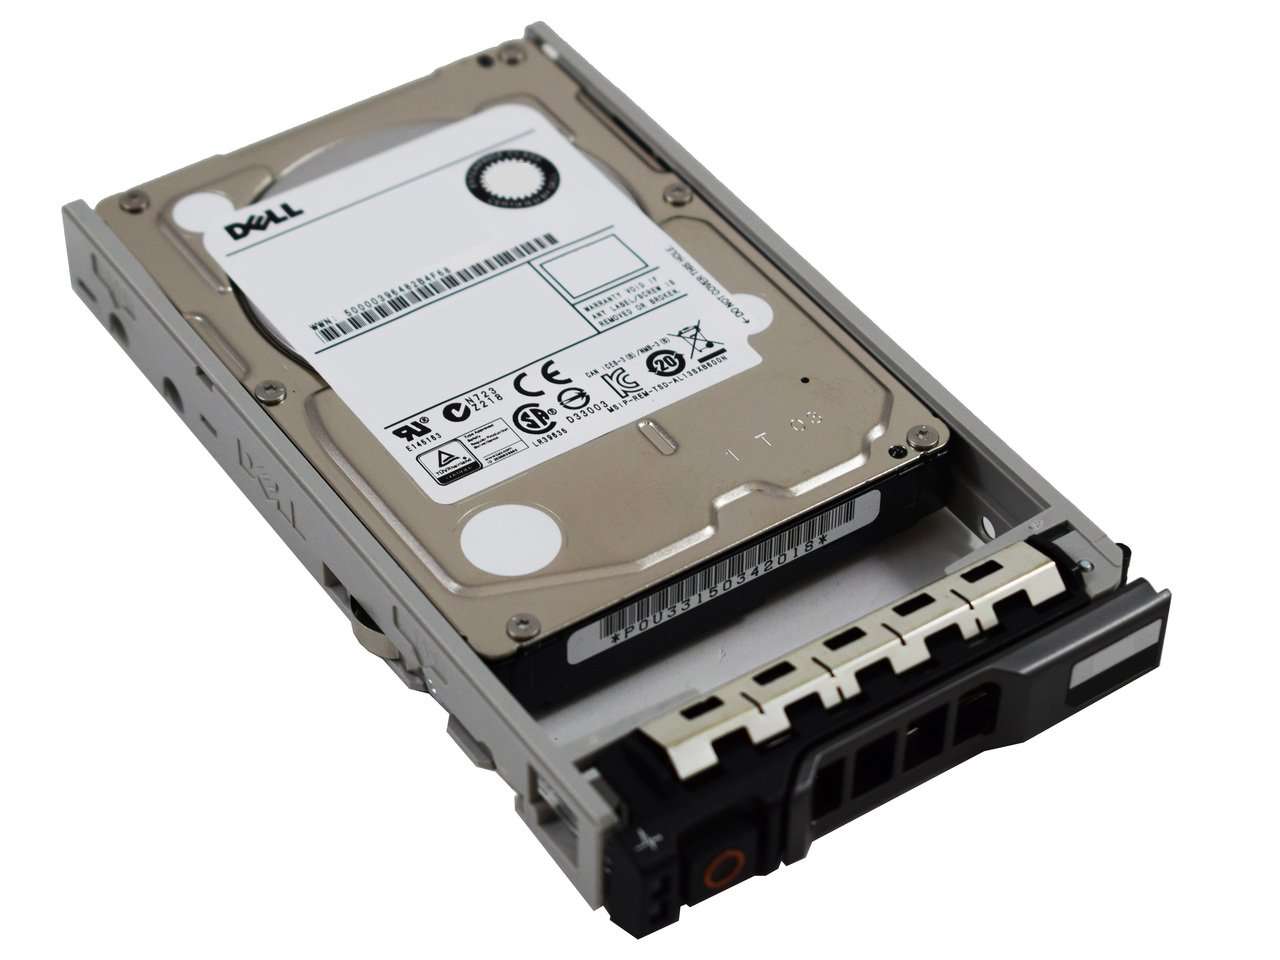 Dell G13 400-ADPE 600GB 15K RPM SAS 6Gb/s 512n 2.5" Manufacturer Recertified HDD